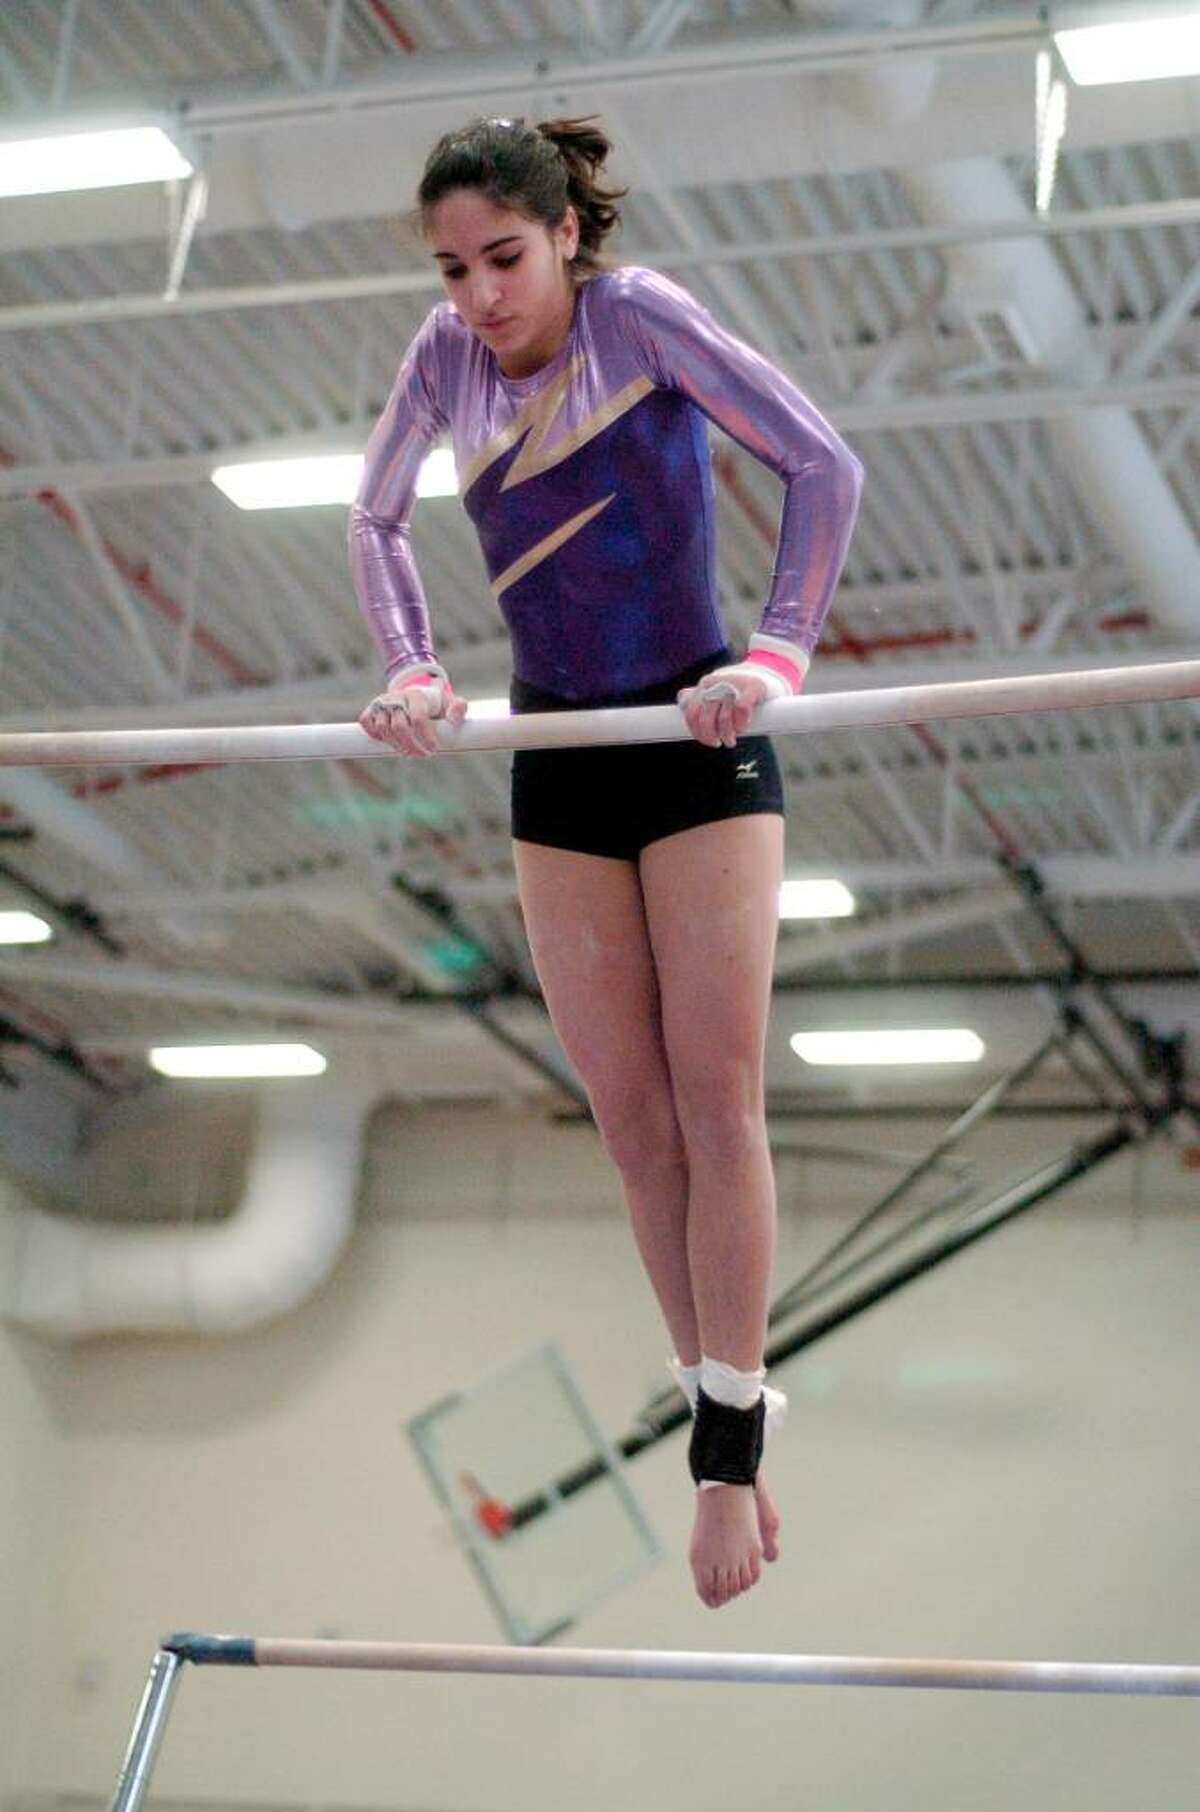 Jordan Schechtman from Westhill competes at the gymnastics meet at Westhill High School in Stamford, Conn. on Monday January 18, 2010. Westhill and Pomperaug are two of the schools competing.